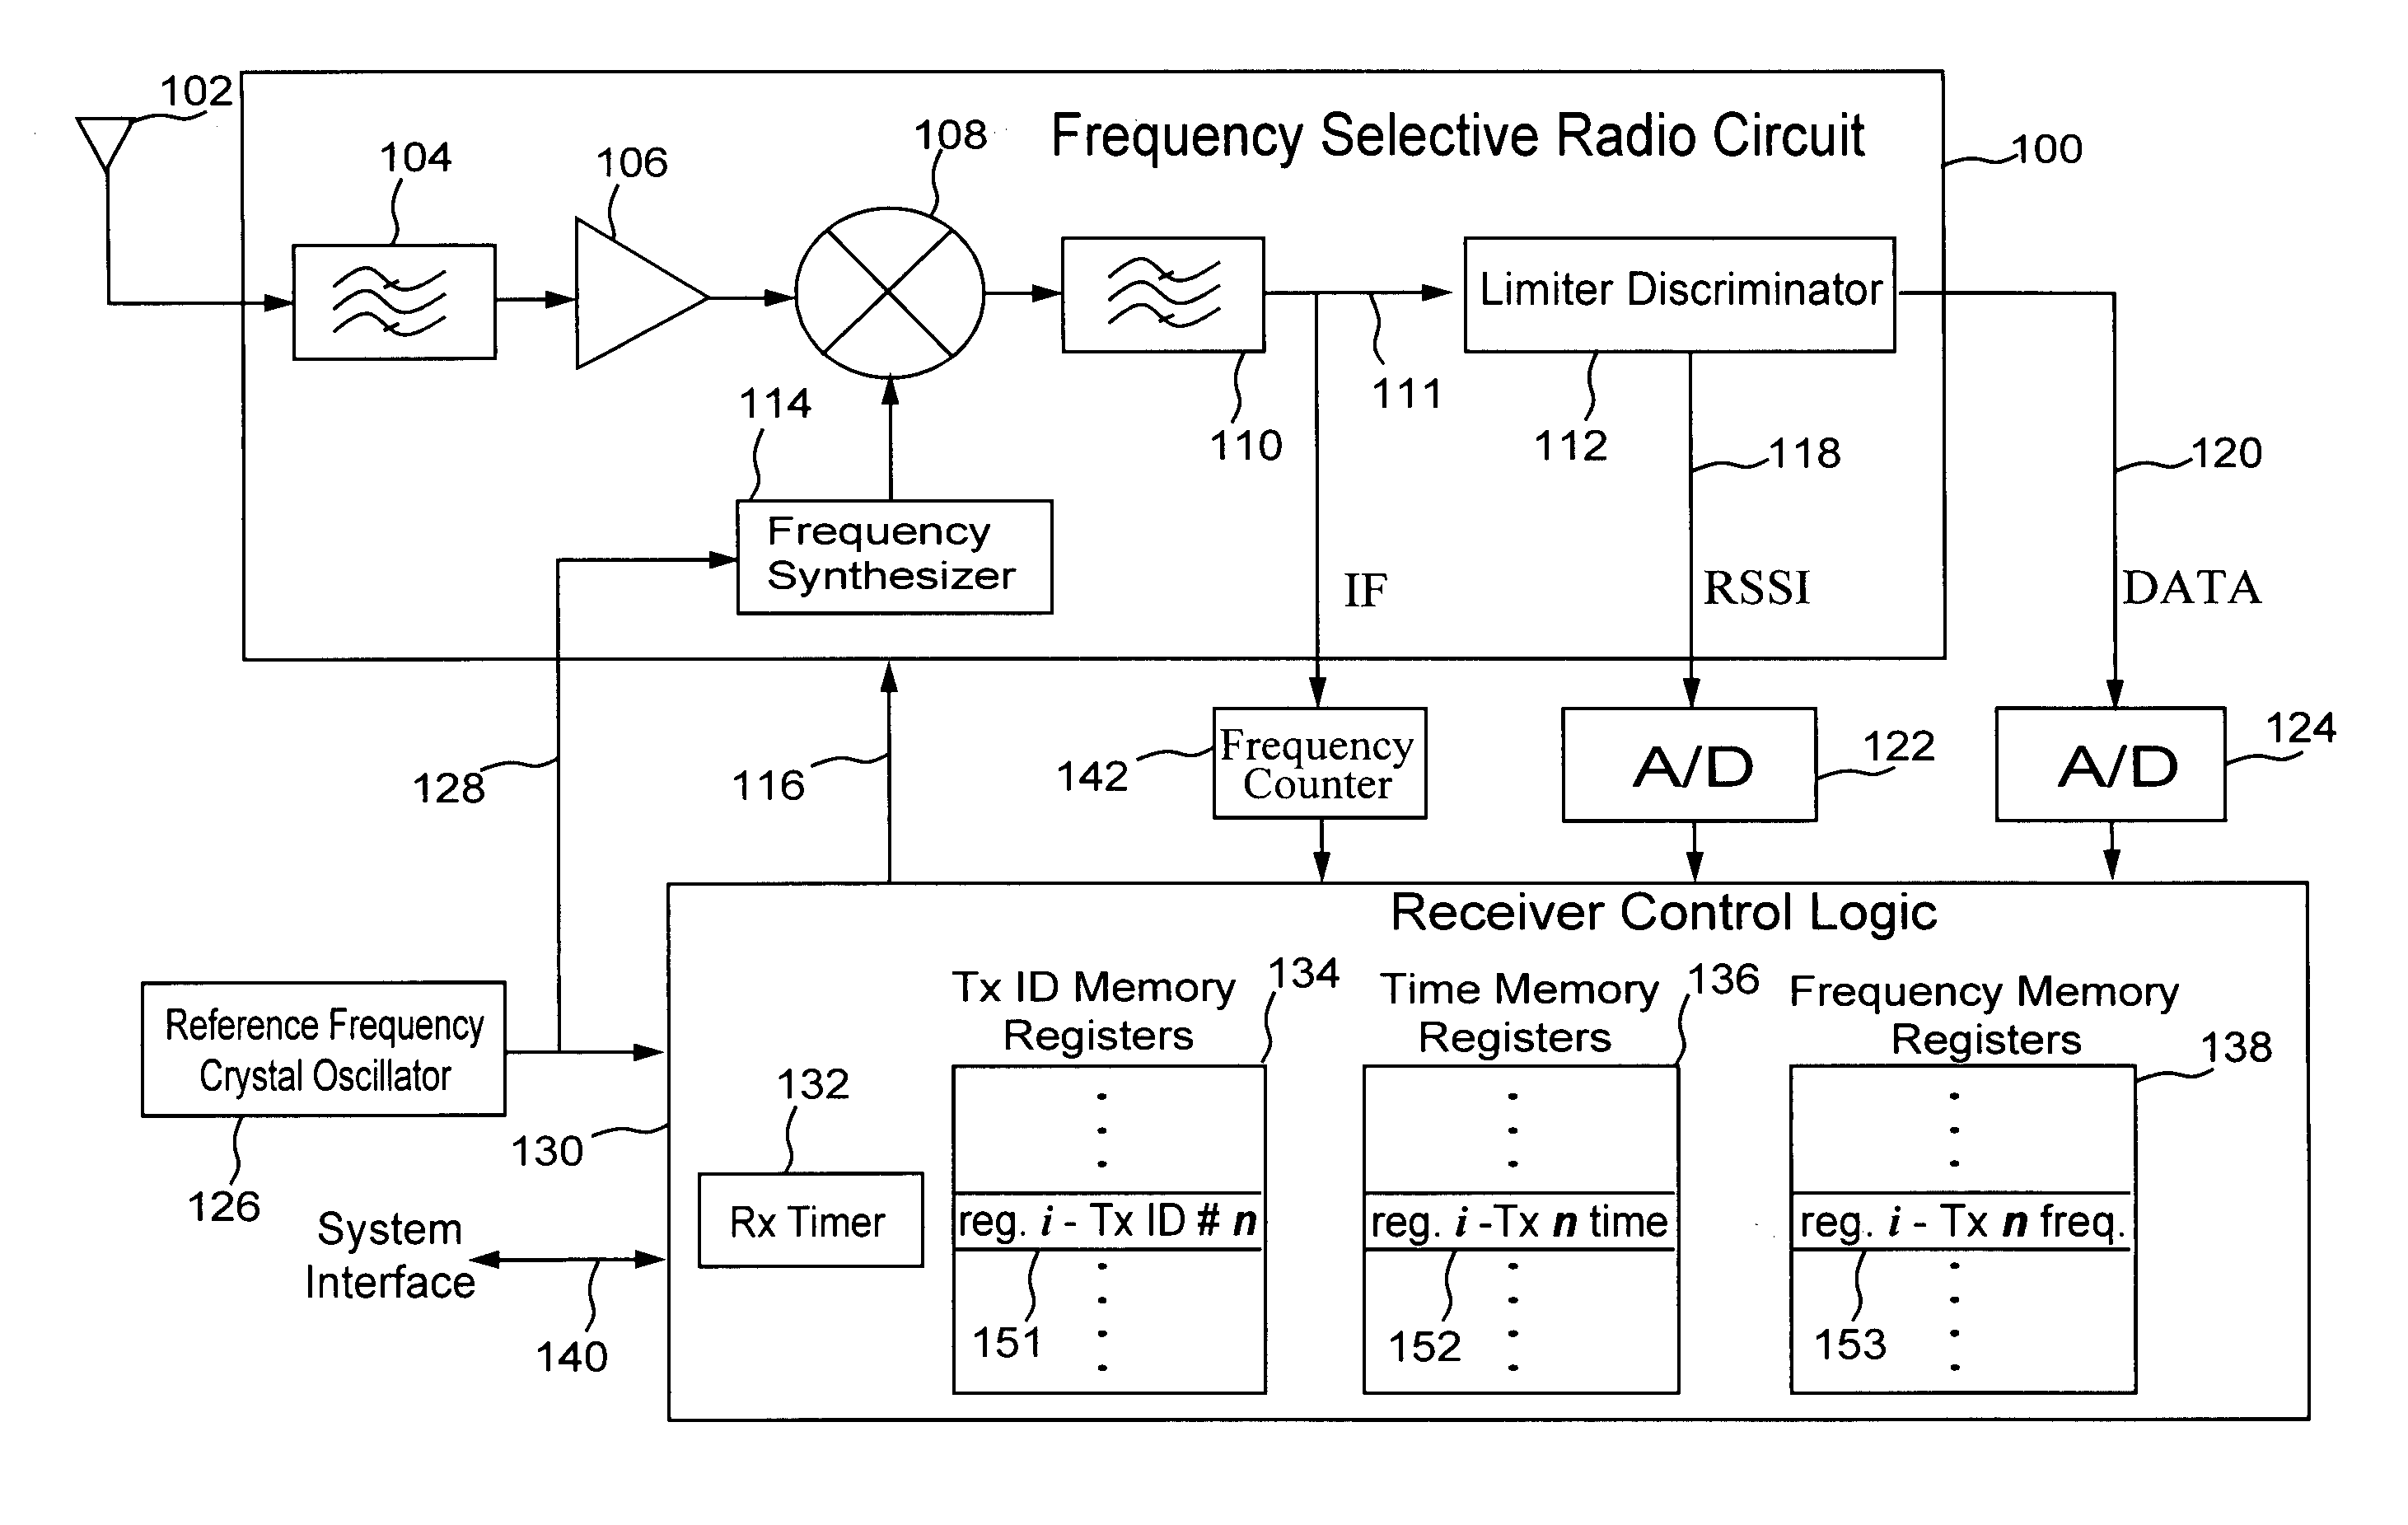 Transmission of urgent messages in telemetry system